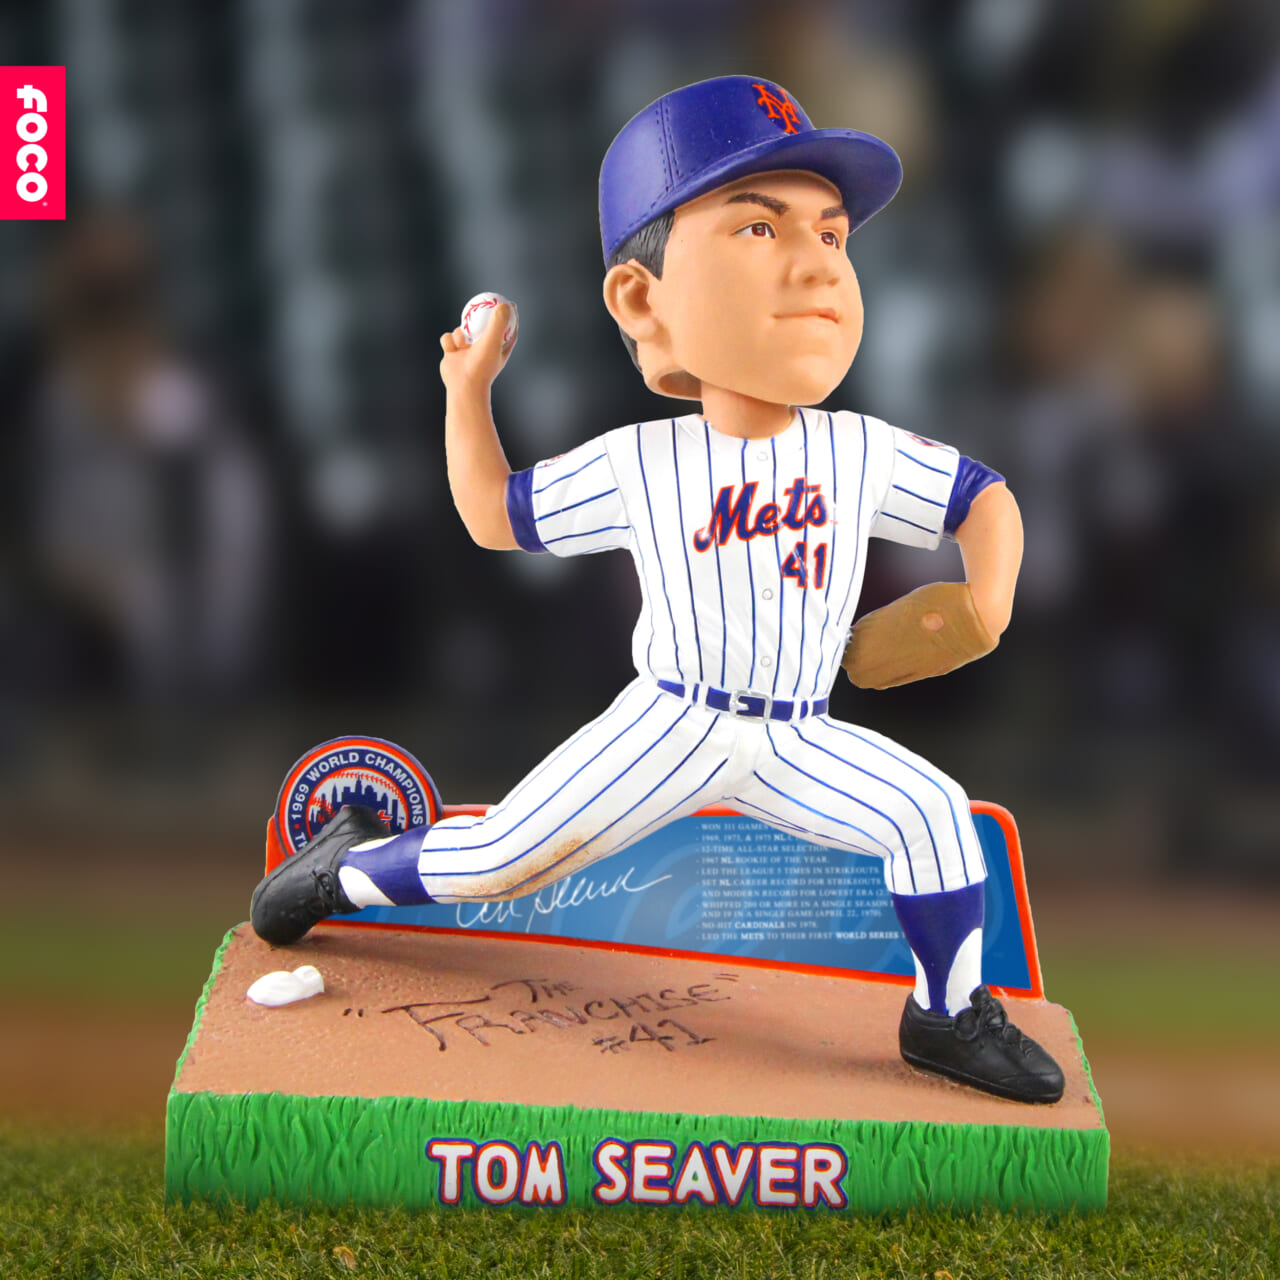 FOCO releases limited edition Mets Tom Seaver bobble-head